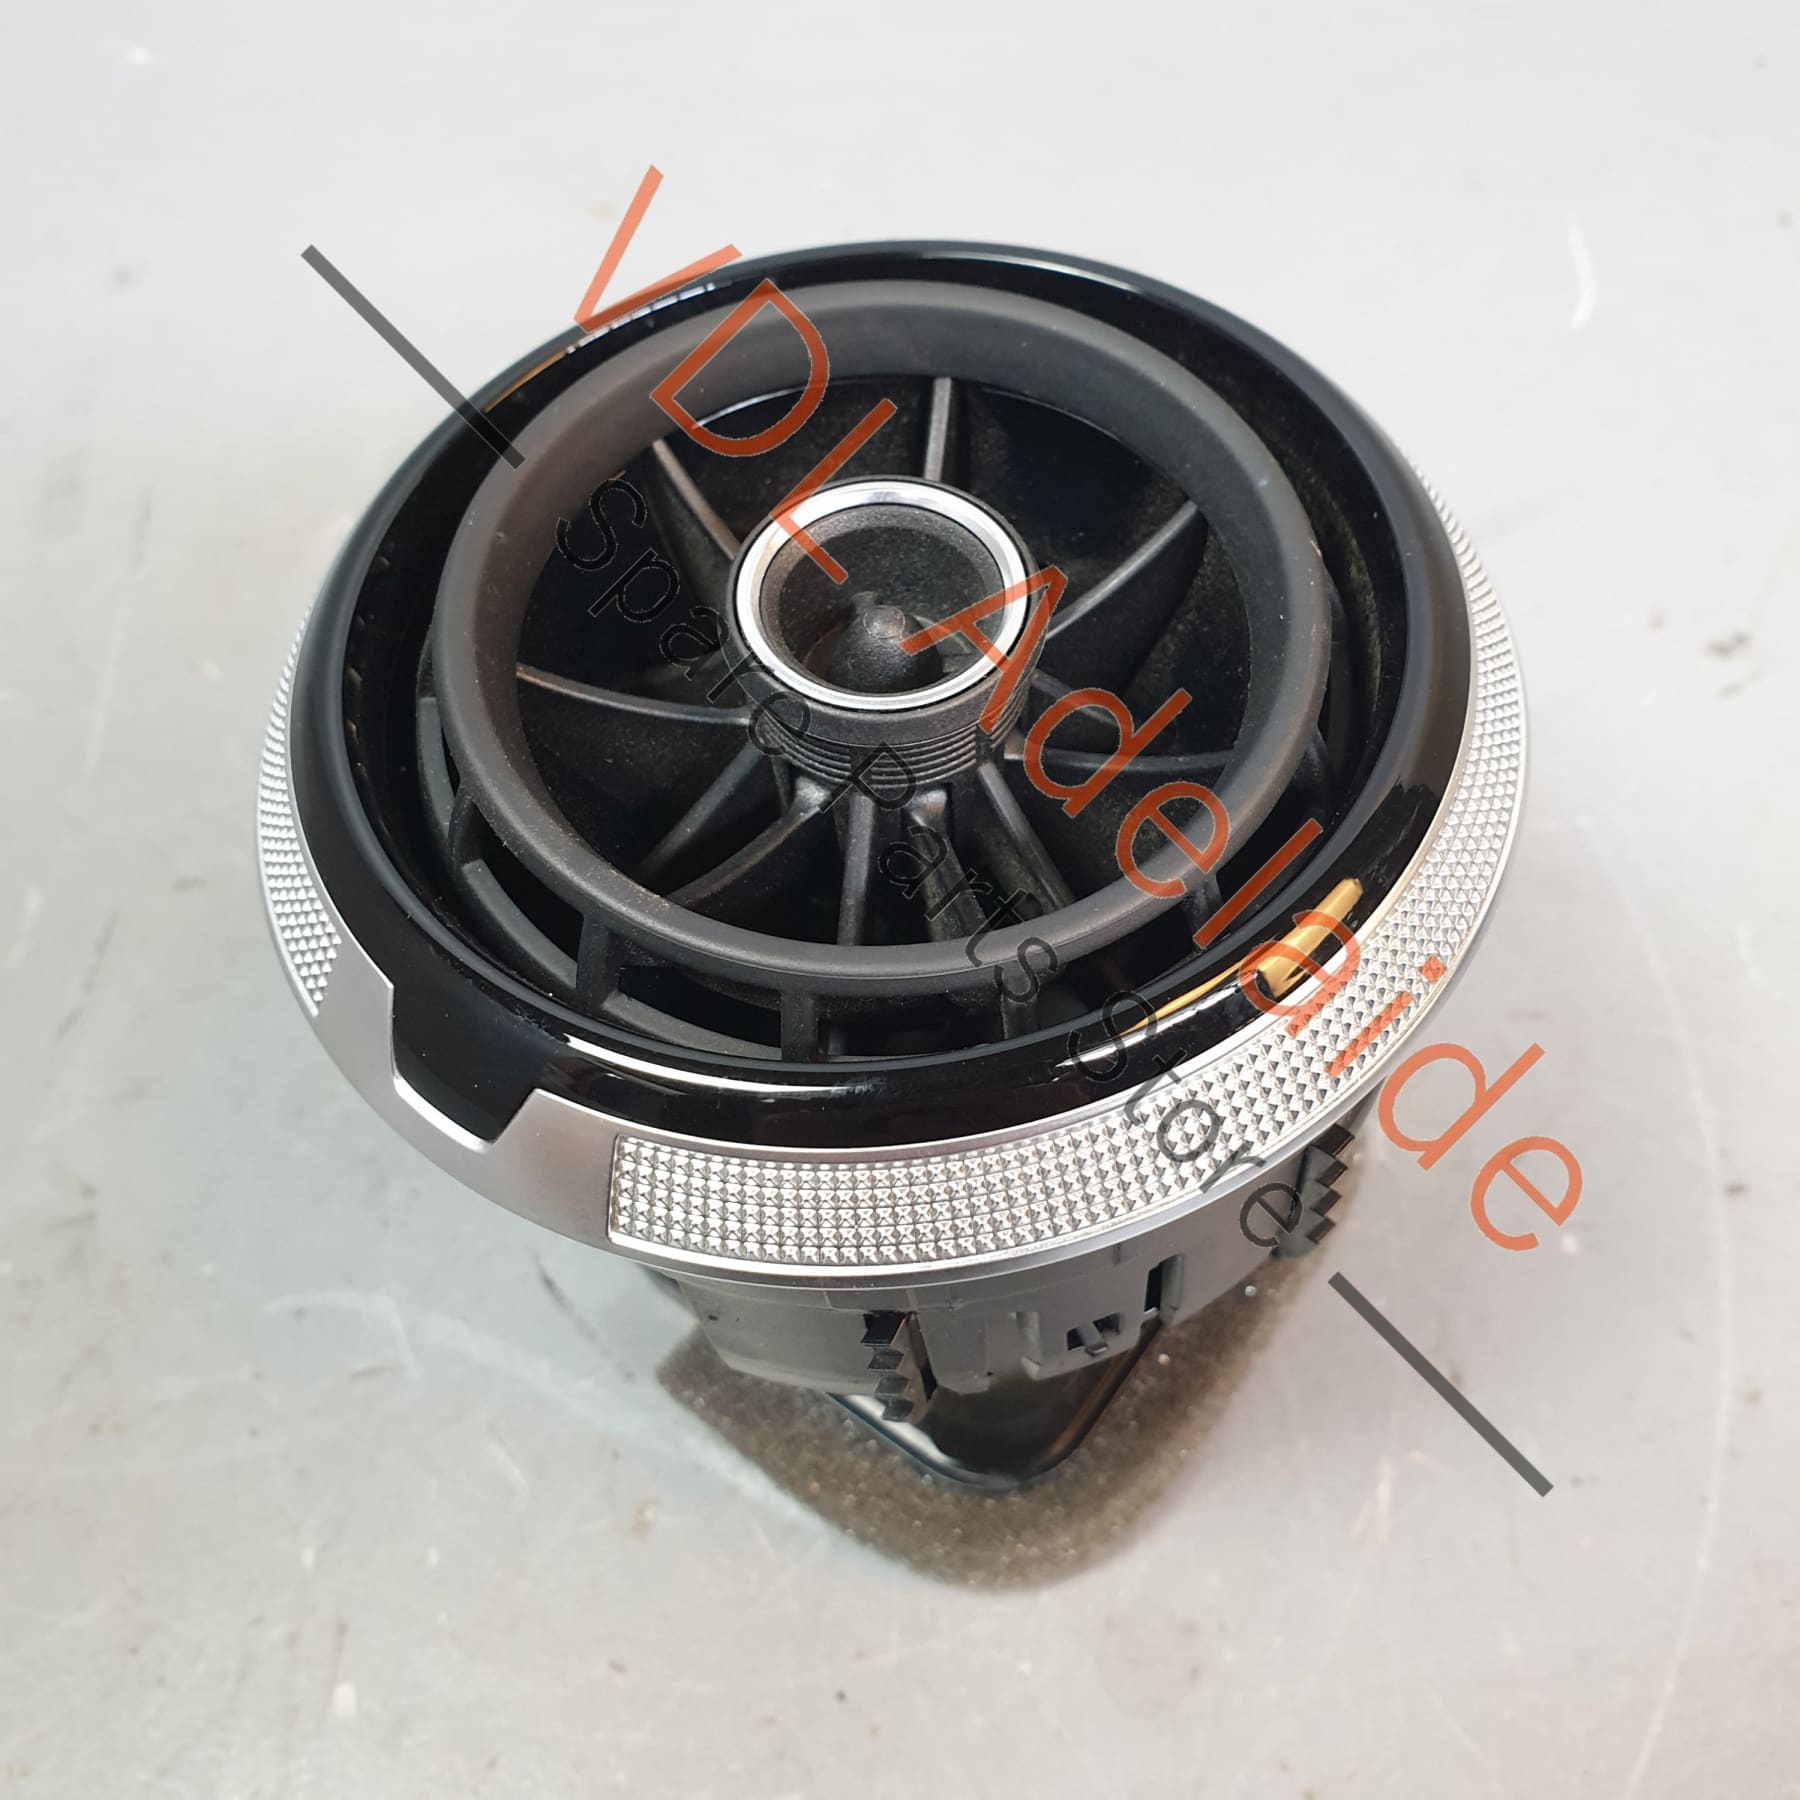 8V0820901A6PS    Audi 8V Dashboard Air Vent Suits Left Right or Middle 8V0820901A 6PS